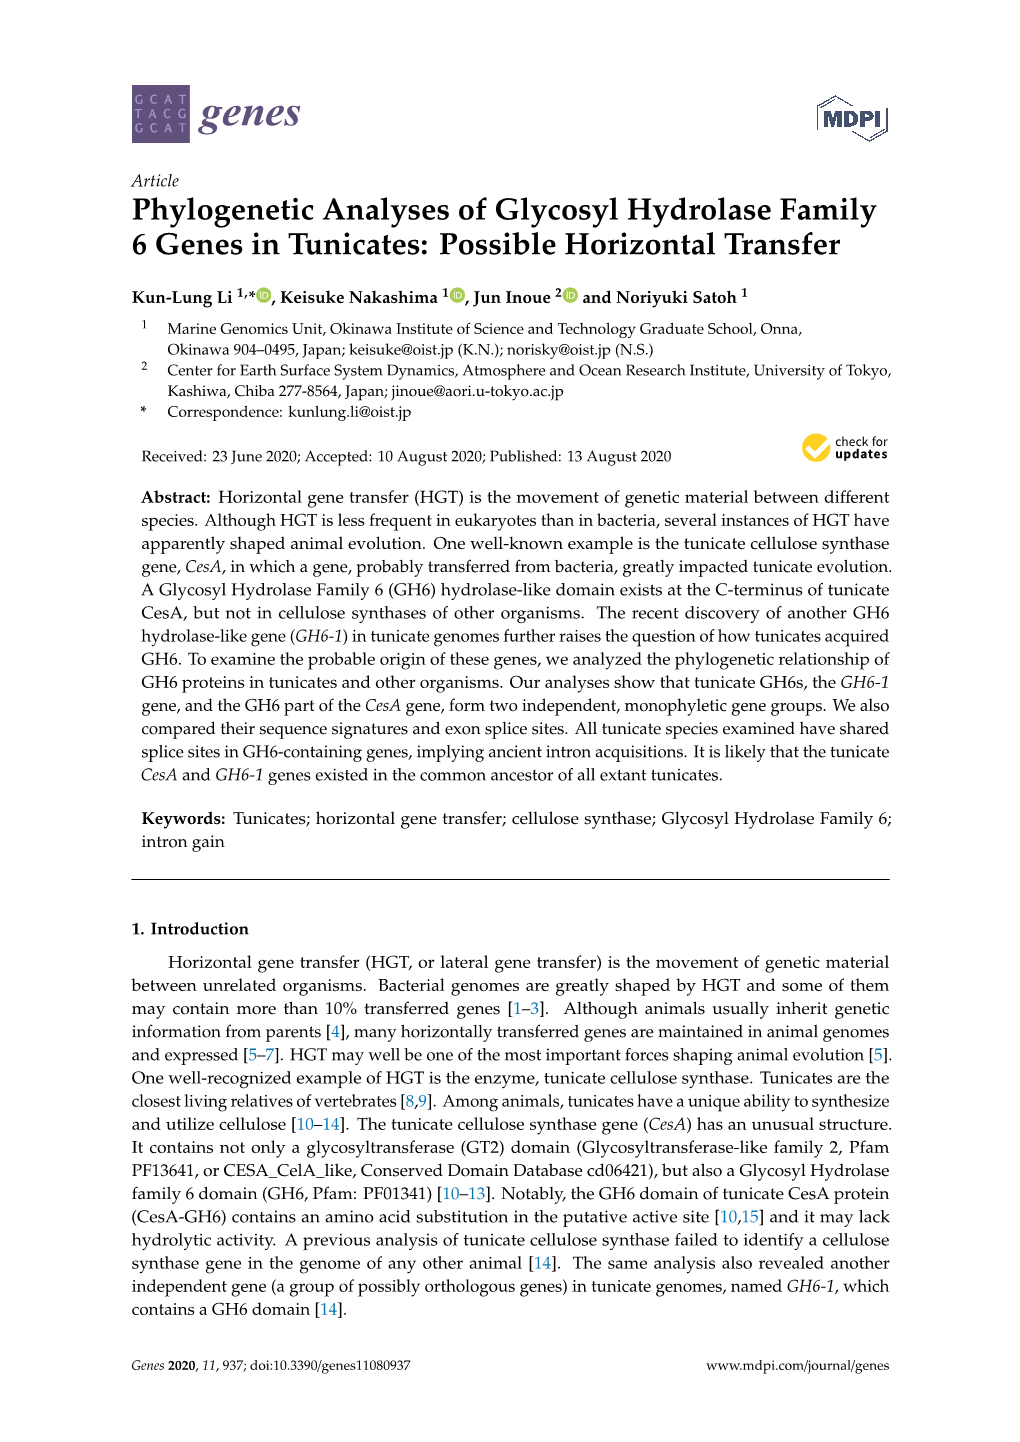 Phylogenetic Analyses of Glycosyl Hydrolase Family 6 Genes in Tunicates: Possible Horizontal Transfer